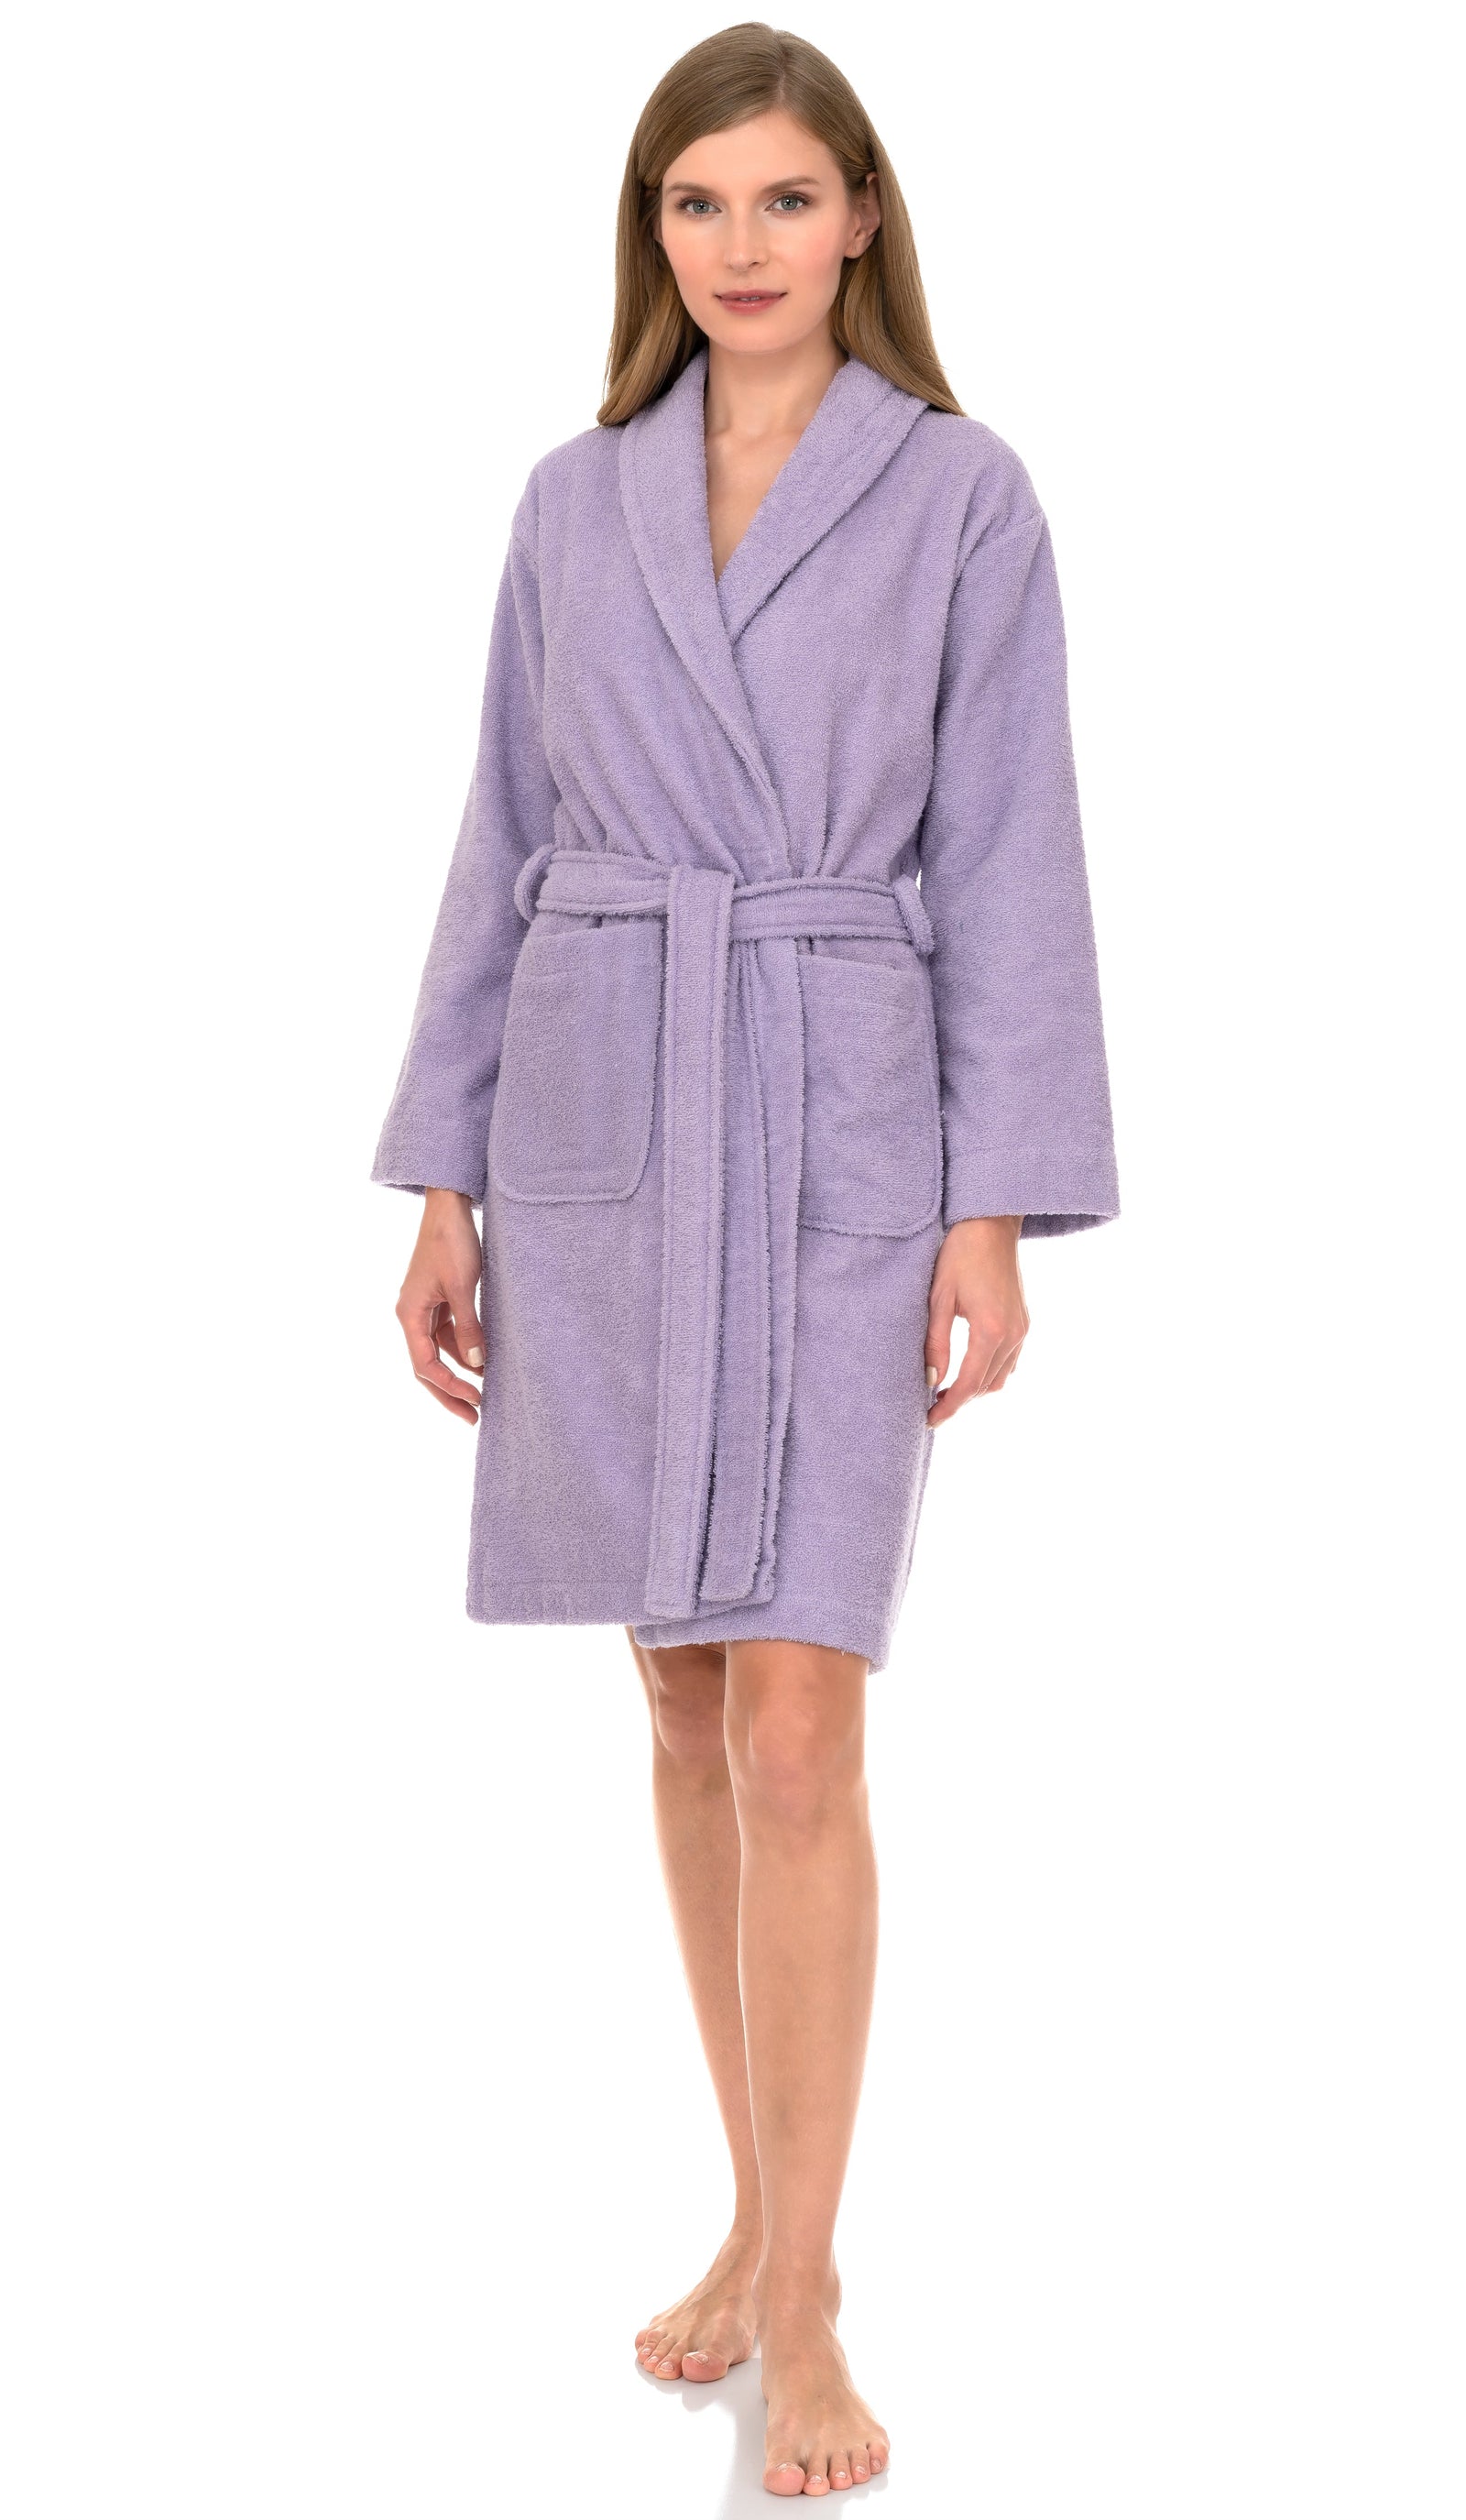 TowelSelections Womens Robe, Premium Cotton Hooded Bathrobe for